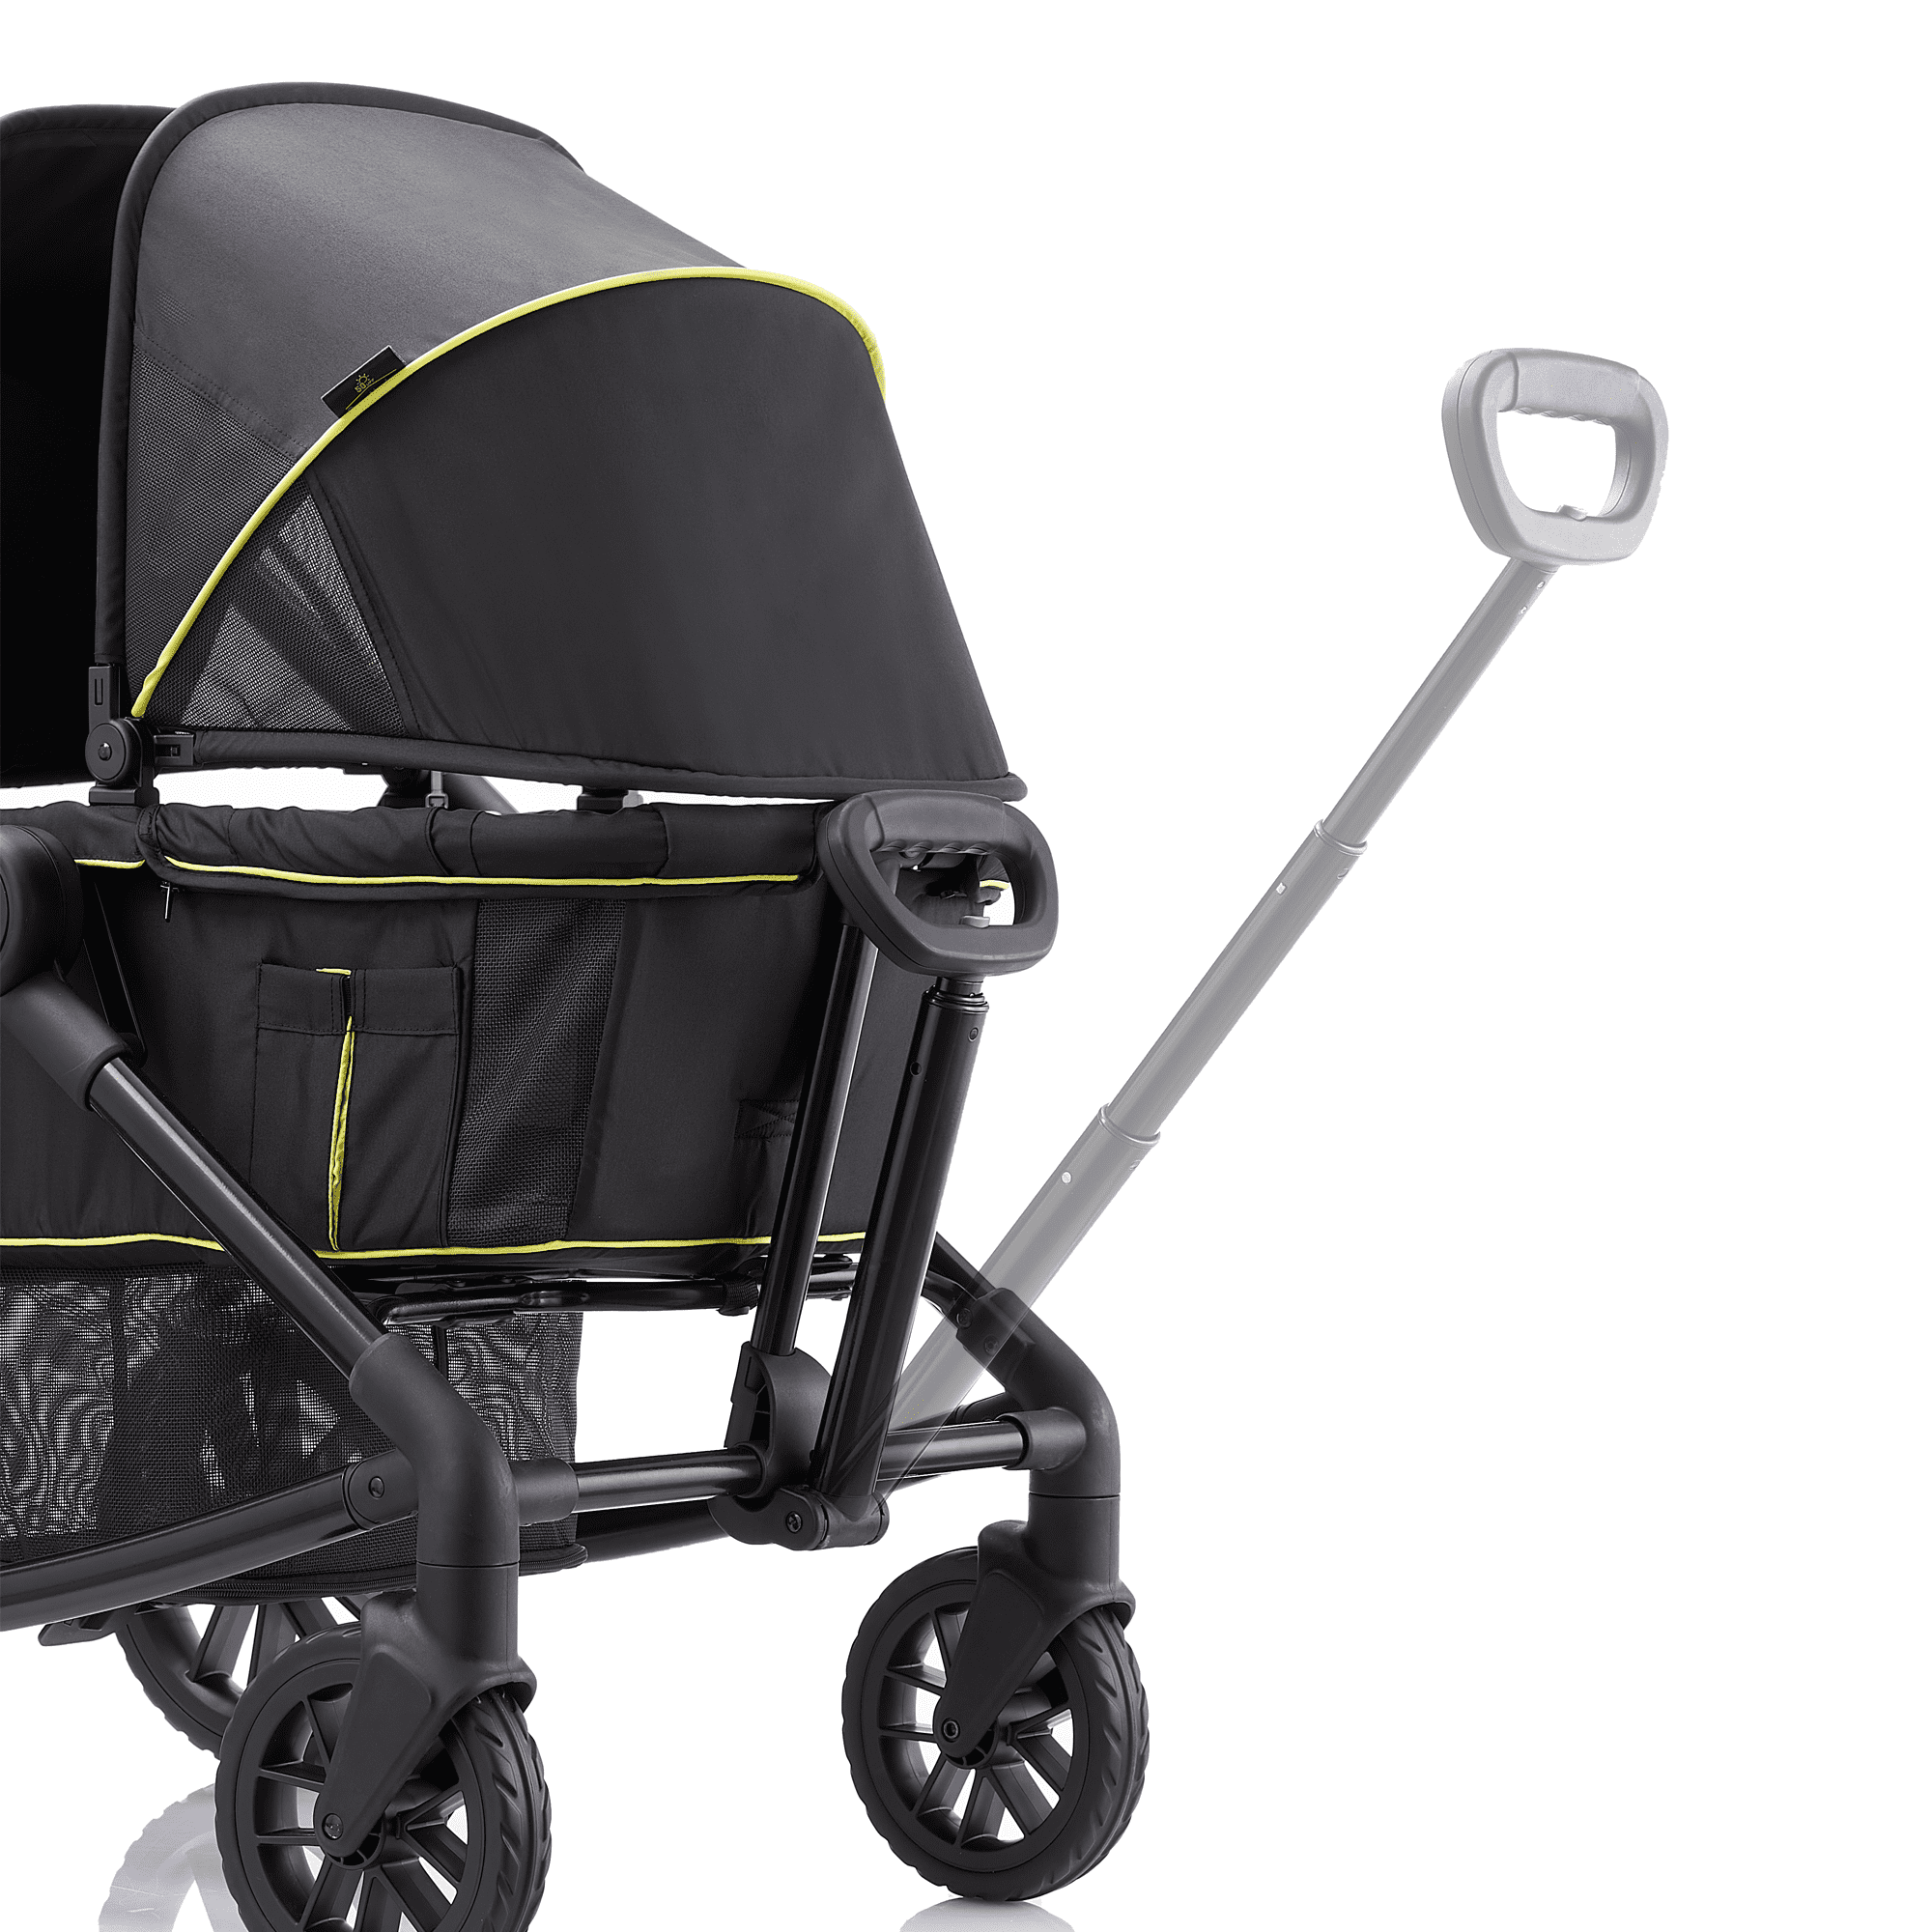 Pamo Babe Unisex 2-Seat Wagon Stroller Folding Baby Stroller with Adjustable Canopy, 6 months - 5 years old